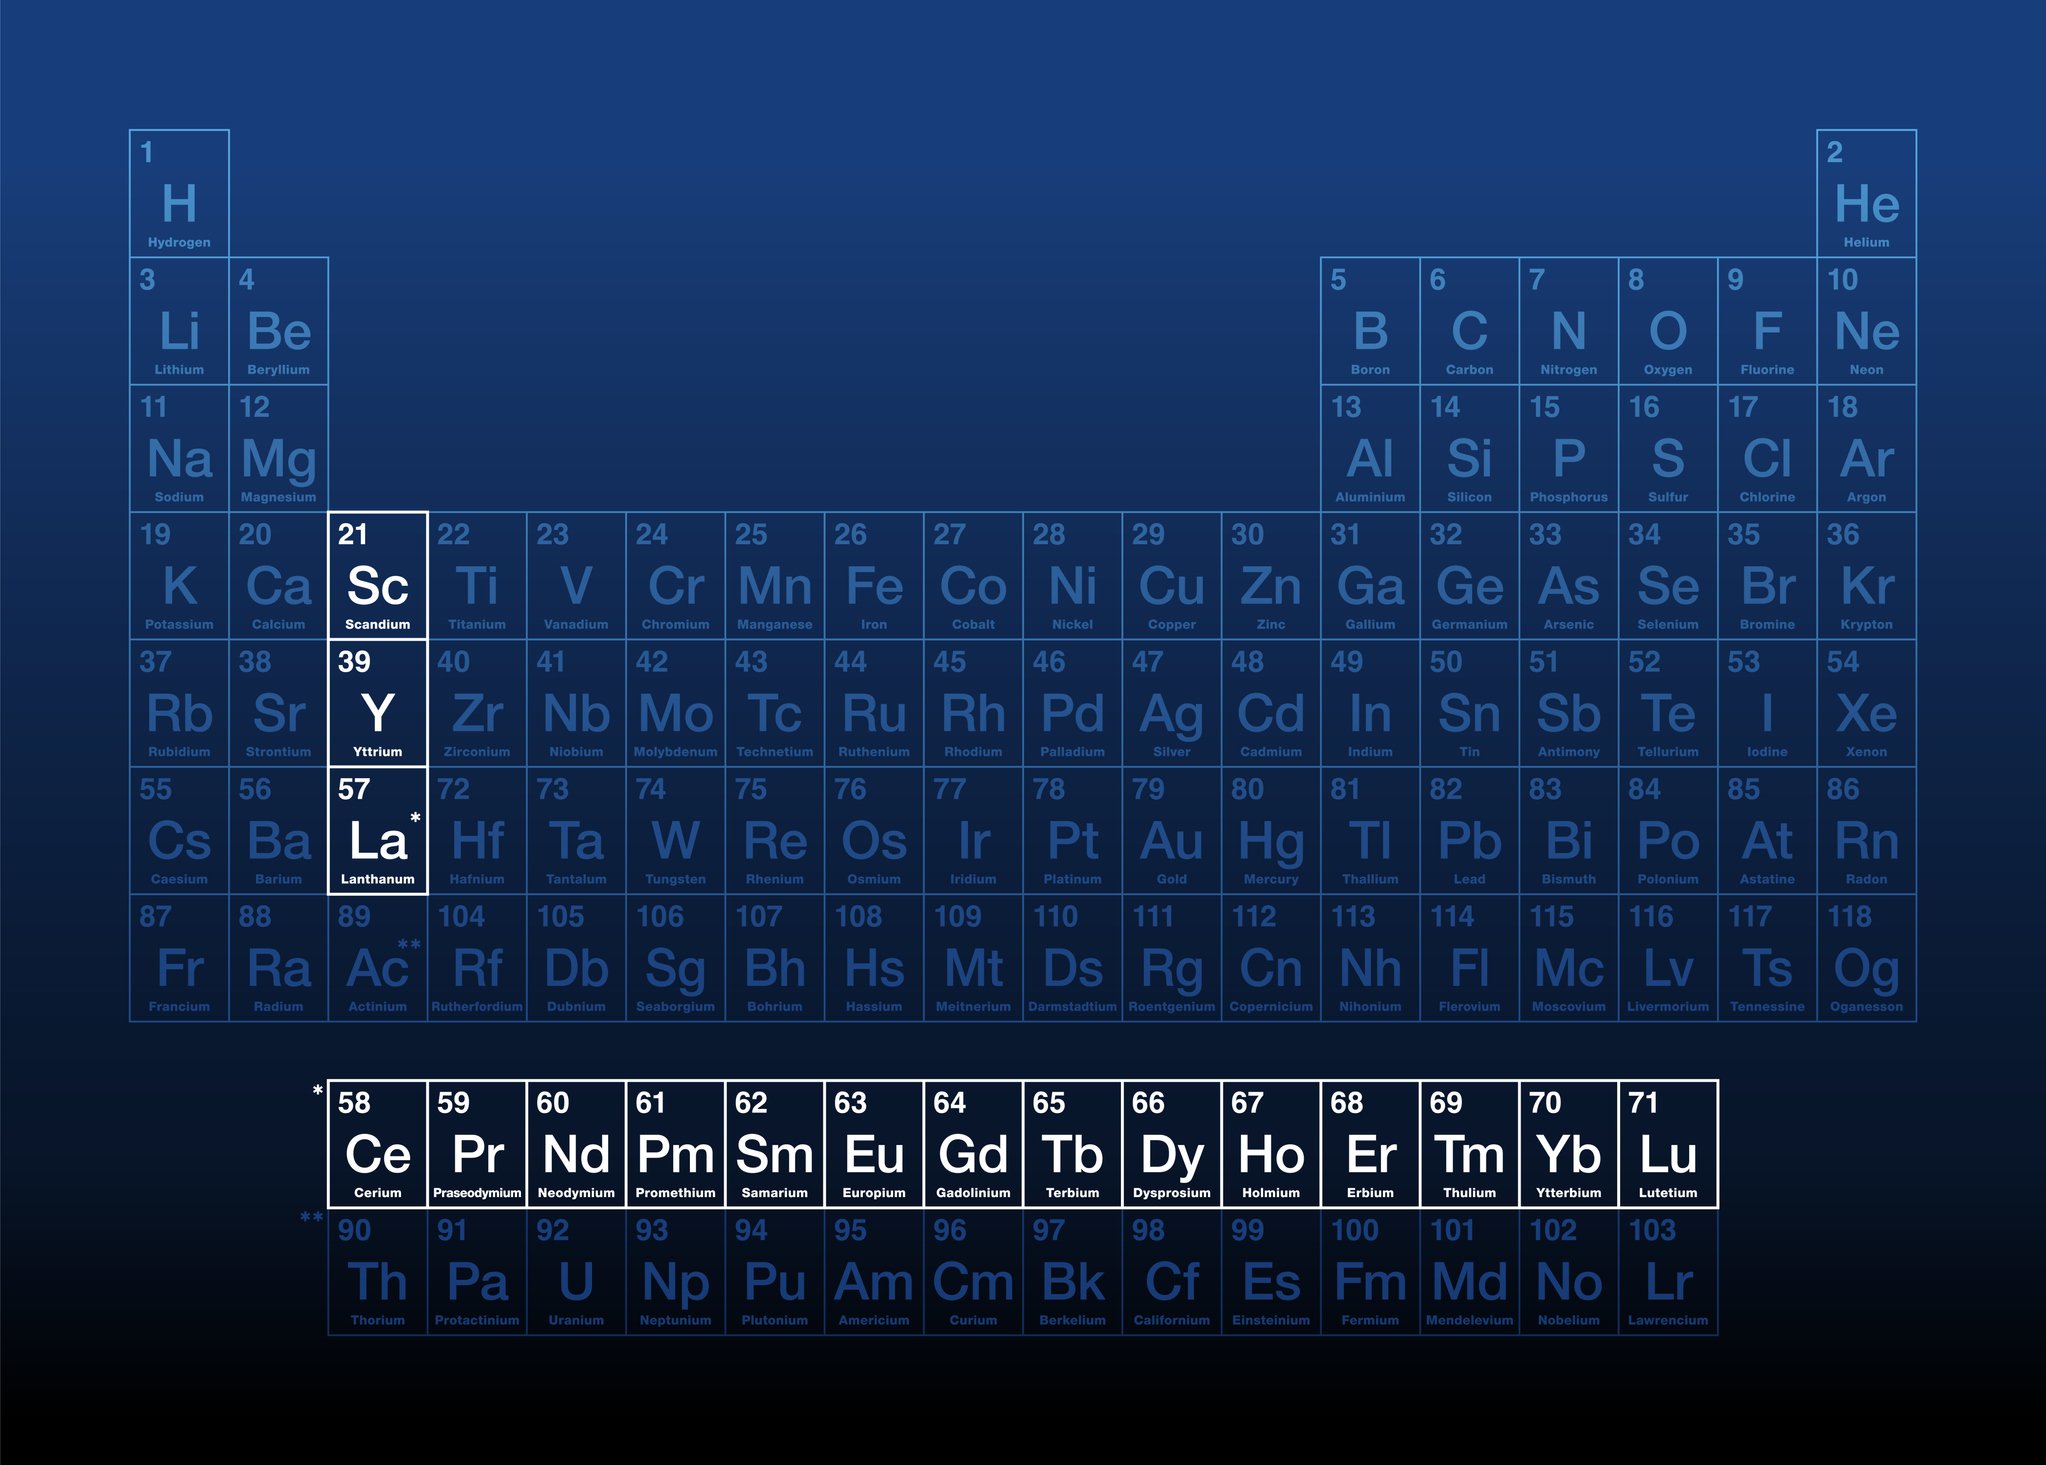 Rare earth metals shown on the periodic table.